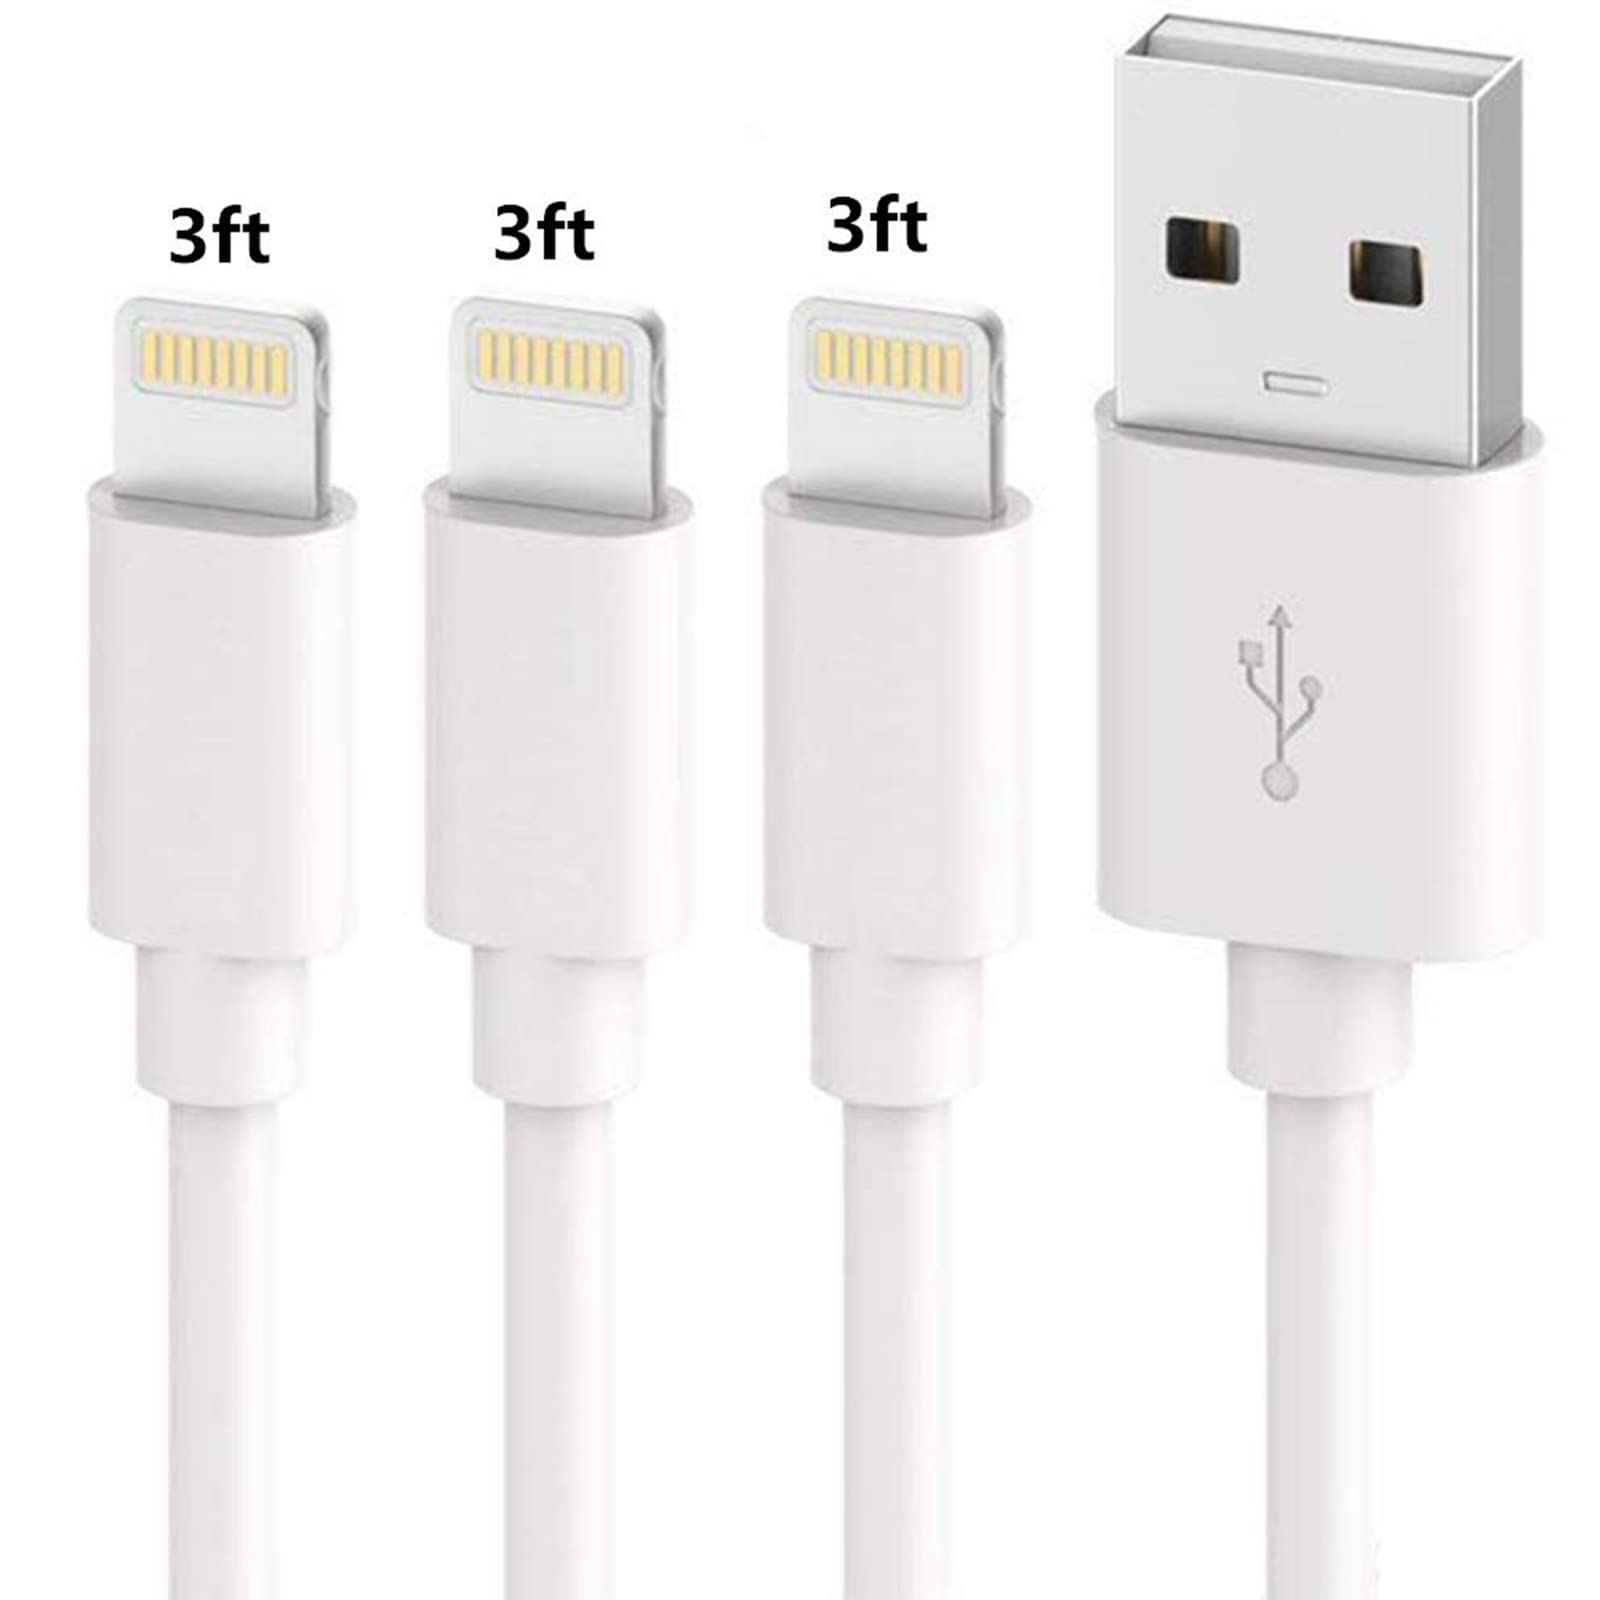 sharllen iPhone Charger Cable (3 Pack 3FT) Fast USB iPhone Charging Cable Long Cord Compatible iPhone 14/13/12/11/XS/Max/XR/X/8/8 Plus/7/7 Plus/6/6 Plus/6S/6S Plus More (White)